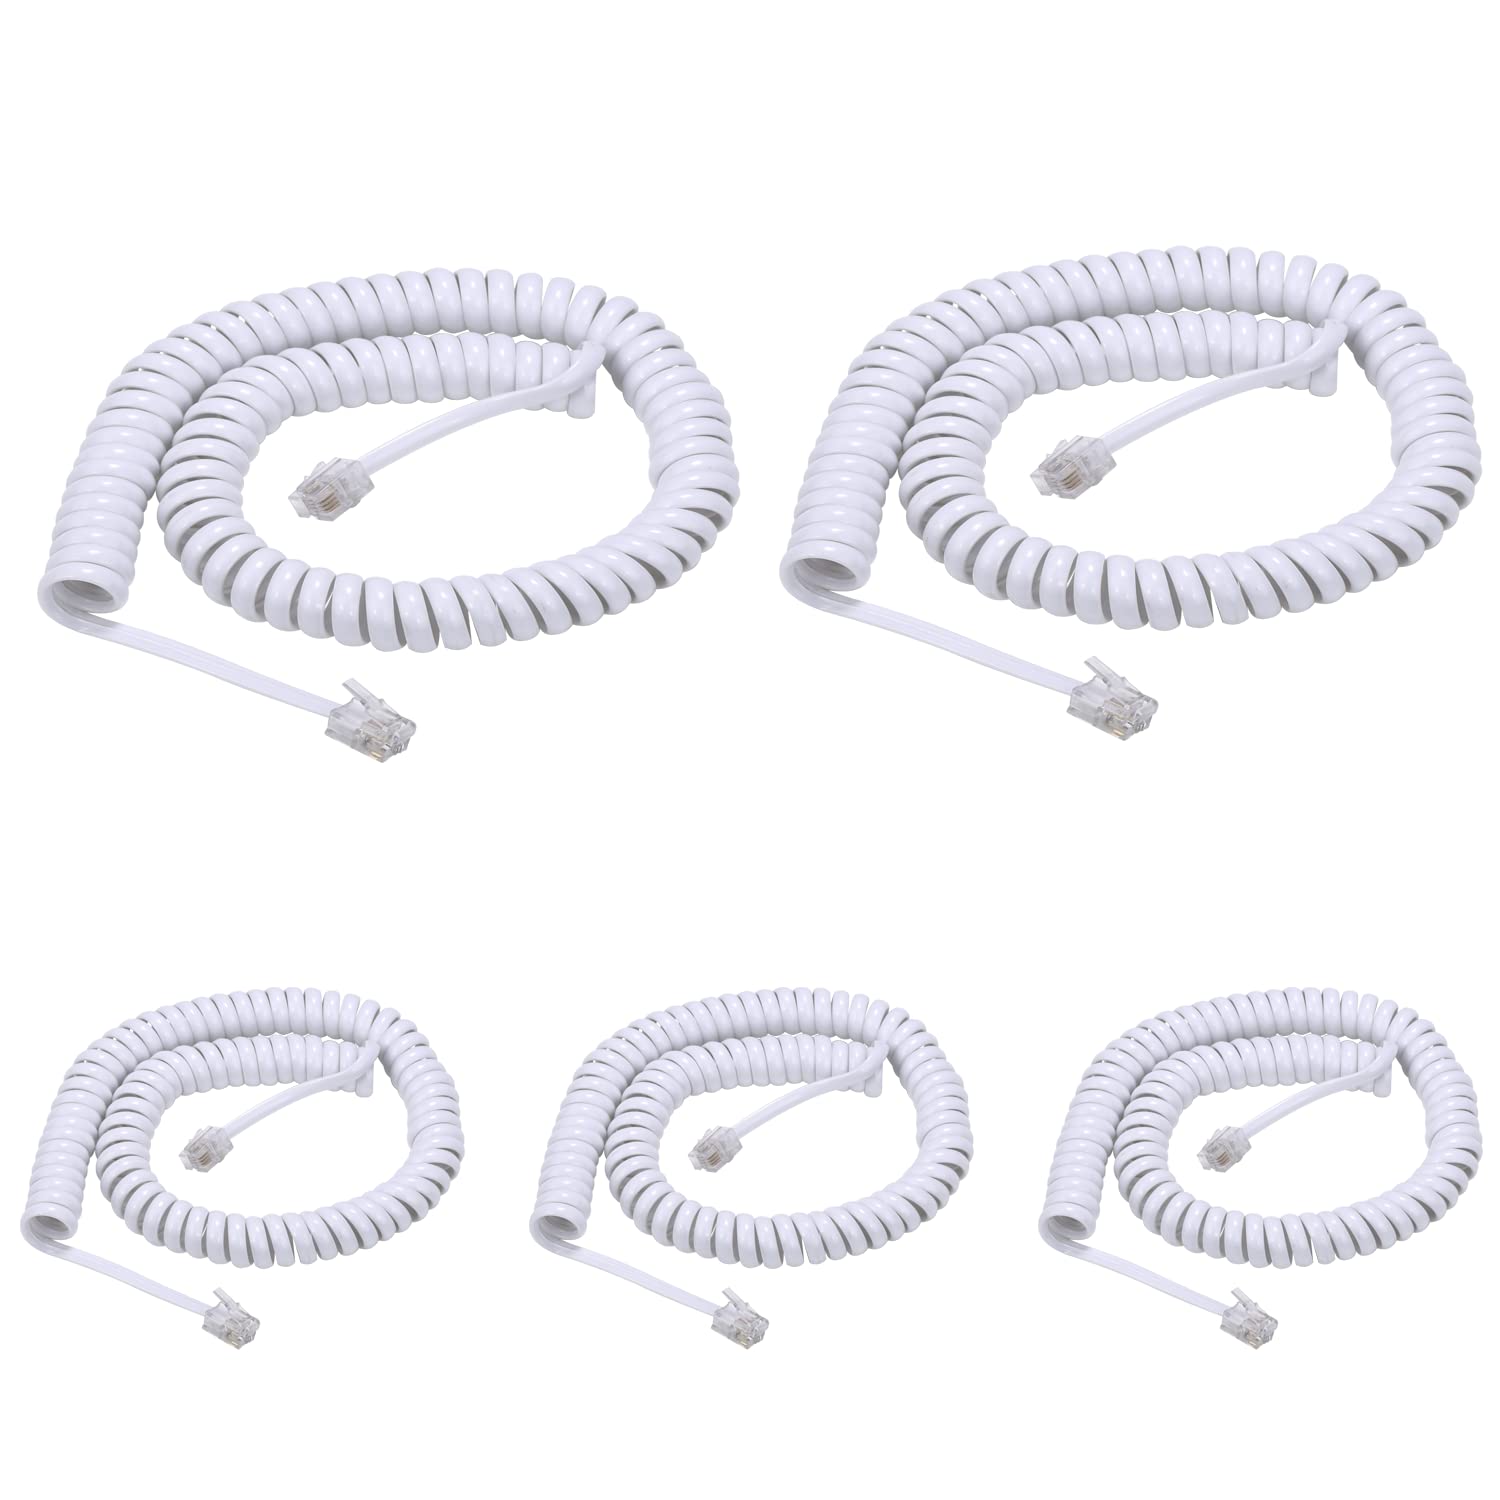 RJ9 Coiled Telephone Wire 6FT Curved Telephone Landline Phone Handset Handle Line Cable 4P4C 6Ft/1.85m